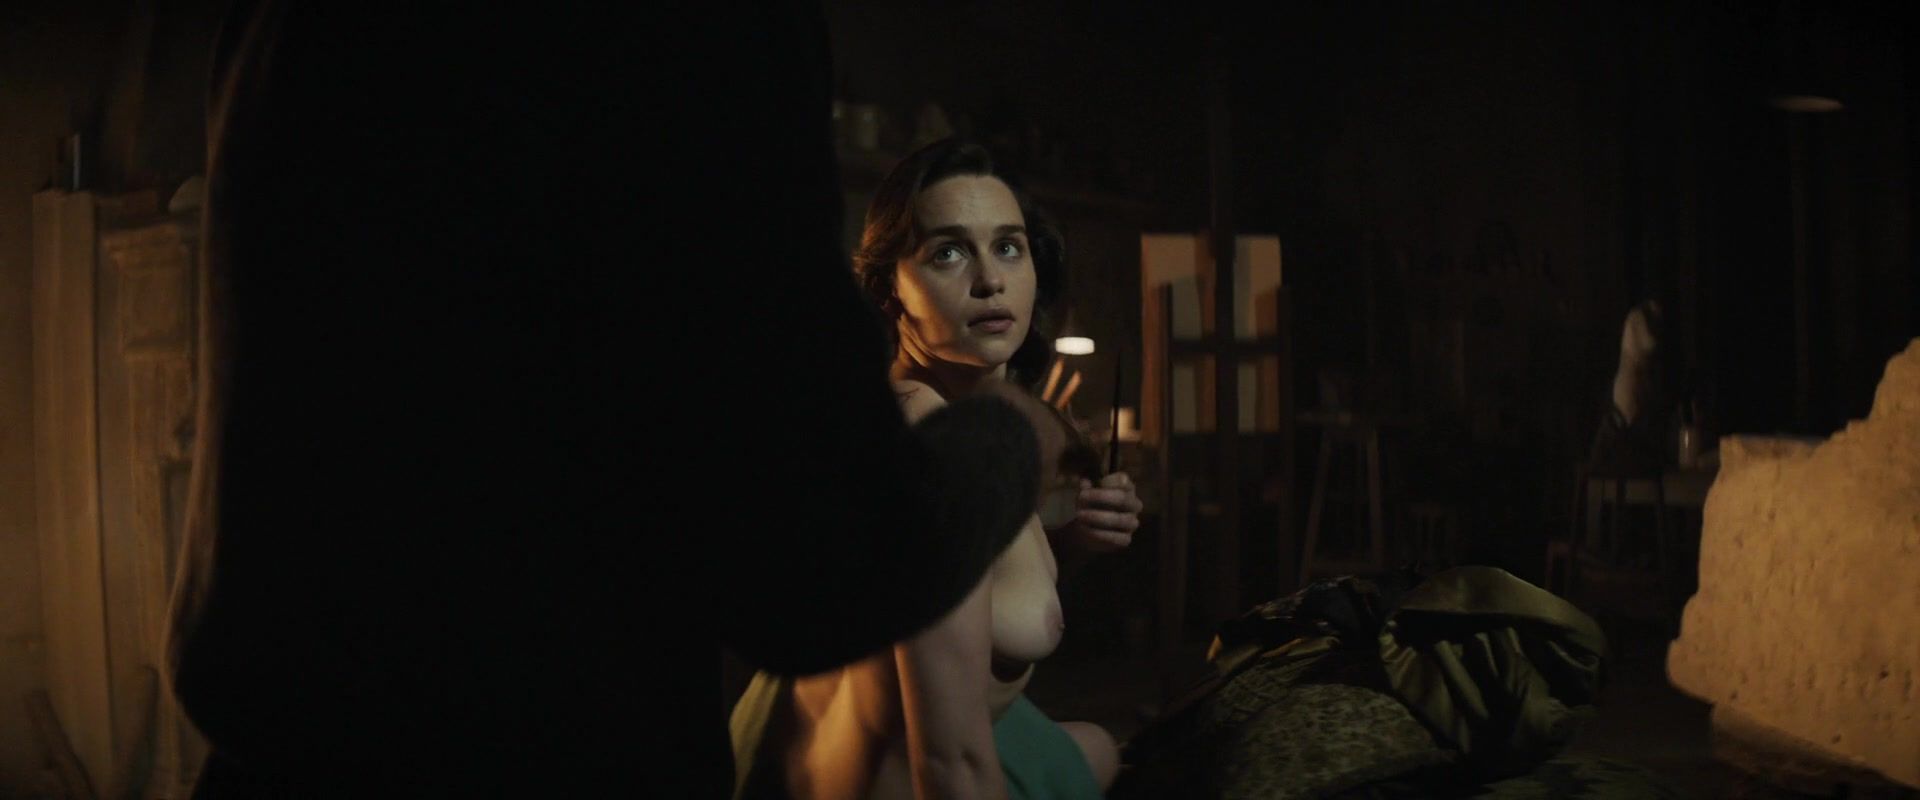 Free Fuck Clips Naked Emilia Clarke in topless scene of the movie "Voice from the Stone" | Released in 2017 Chubby